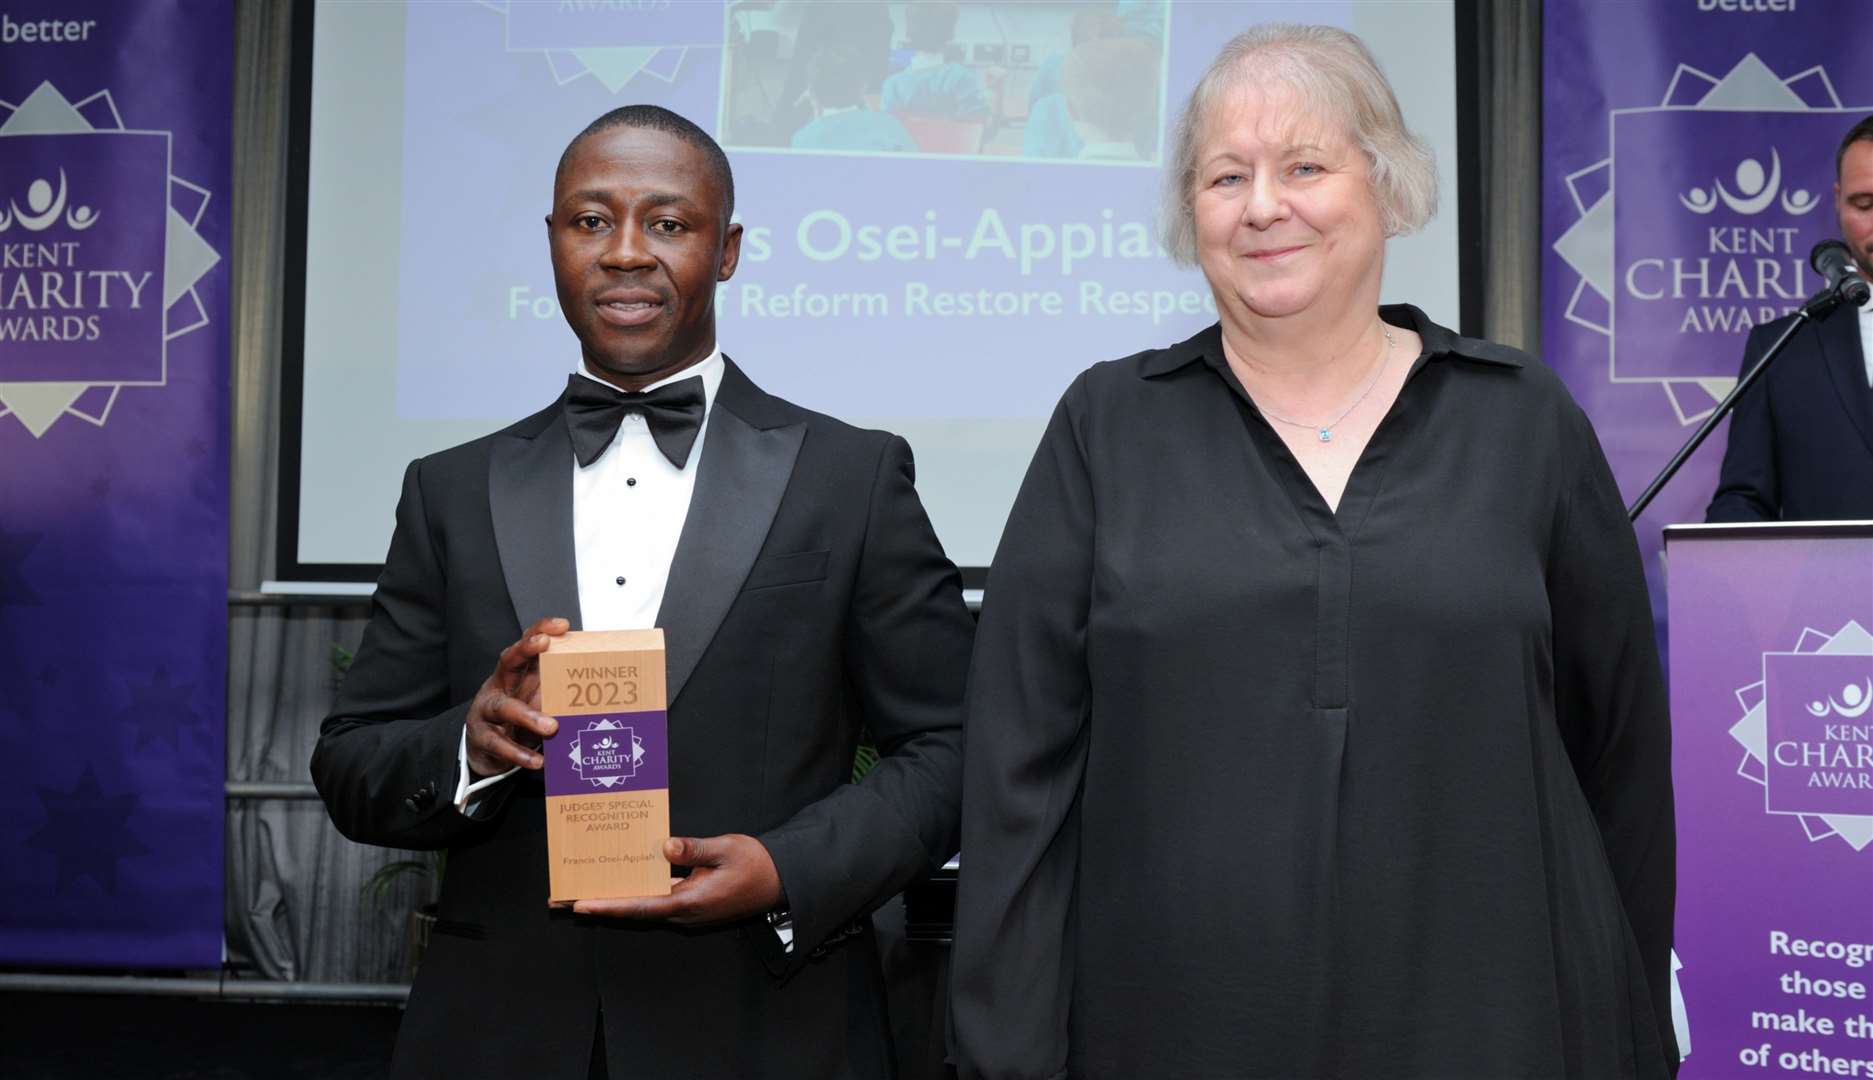 Winner Francis Osel-Appiah from Reform, Restore, Respect with head judge Susan Robinson. Picture: Simon Hildrew